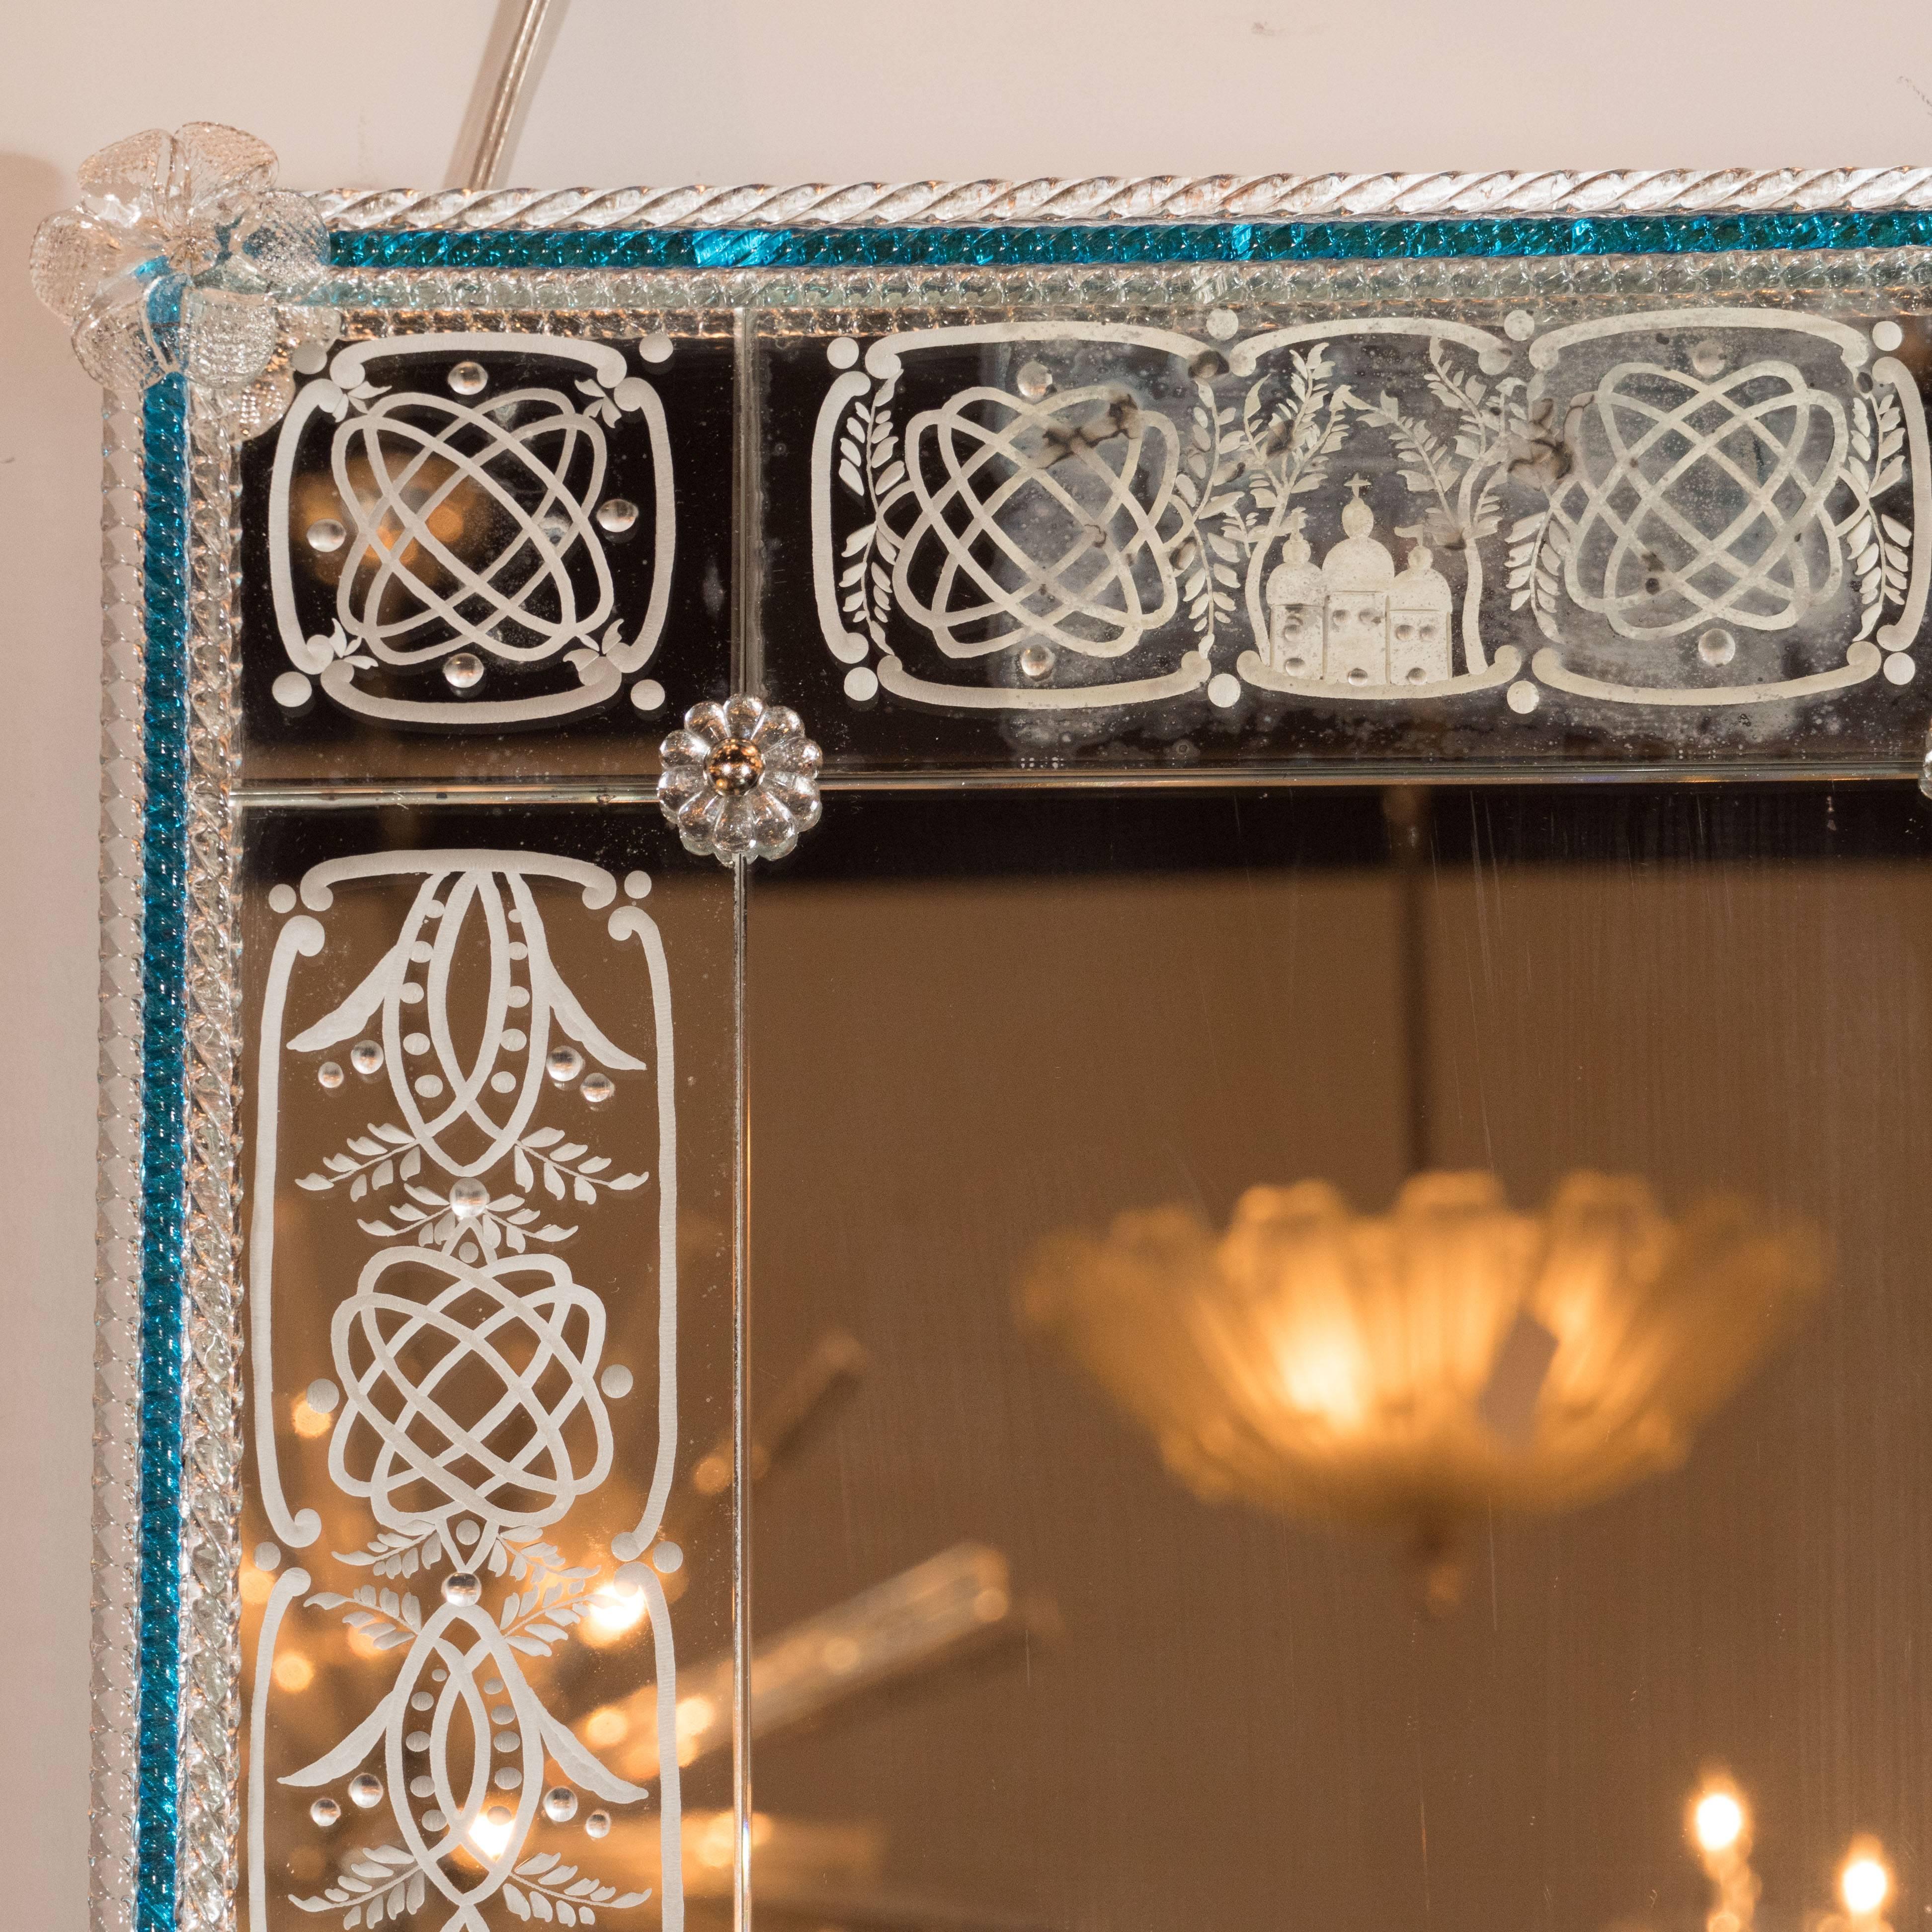 Early 20th Century Venetian Handmade Reverse Etched Mirror W/ Murano Applique and Cerulean Border